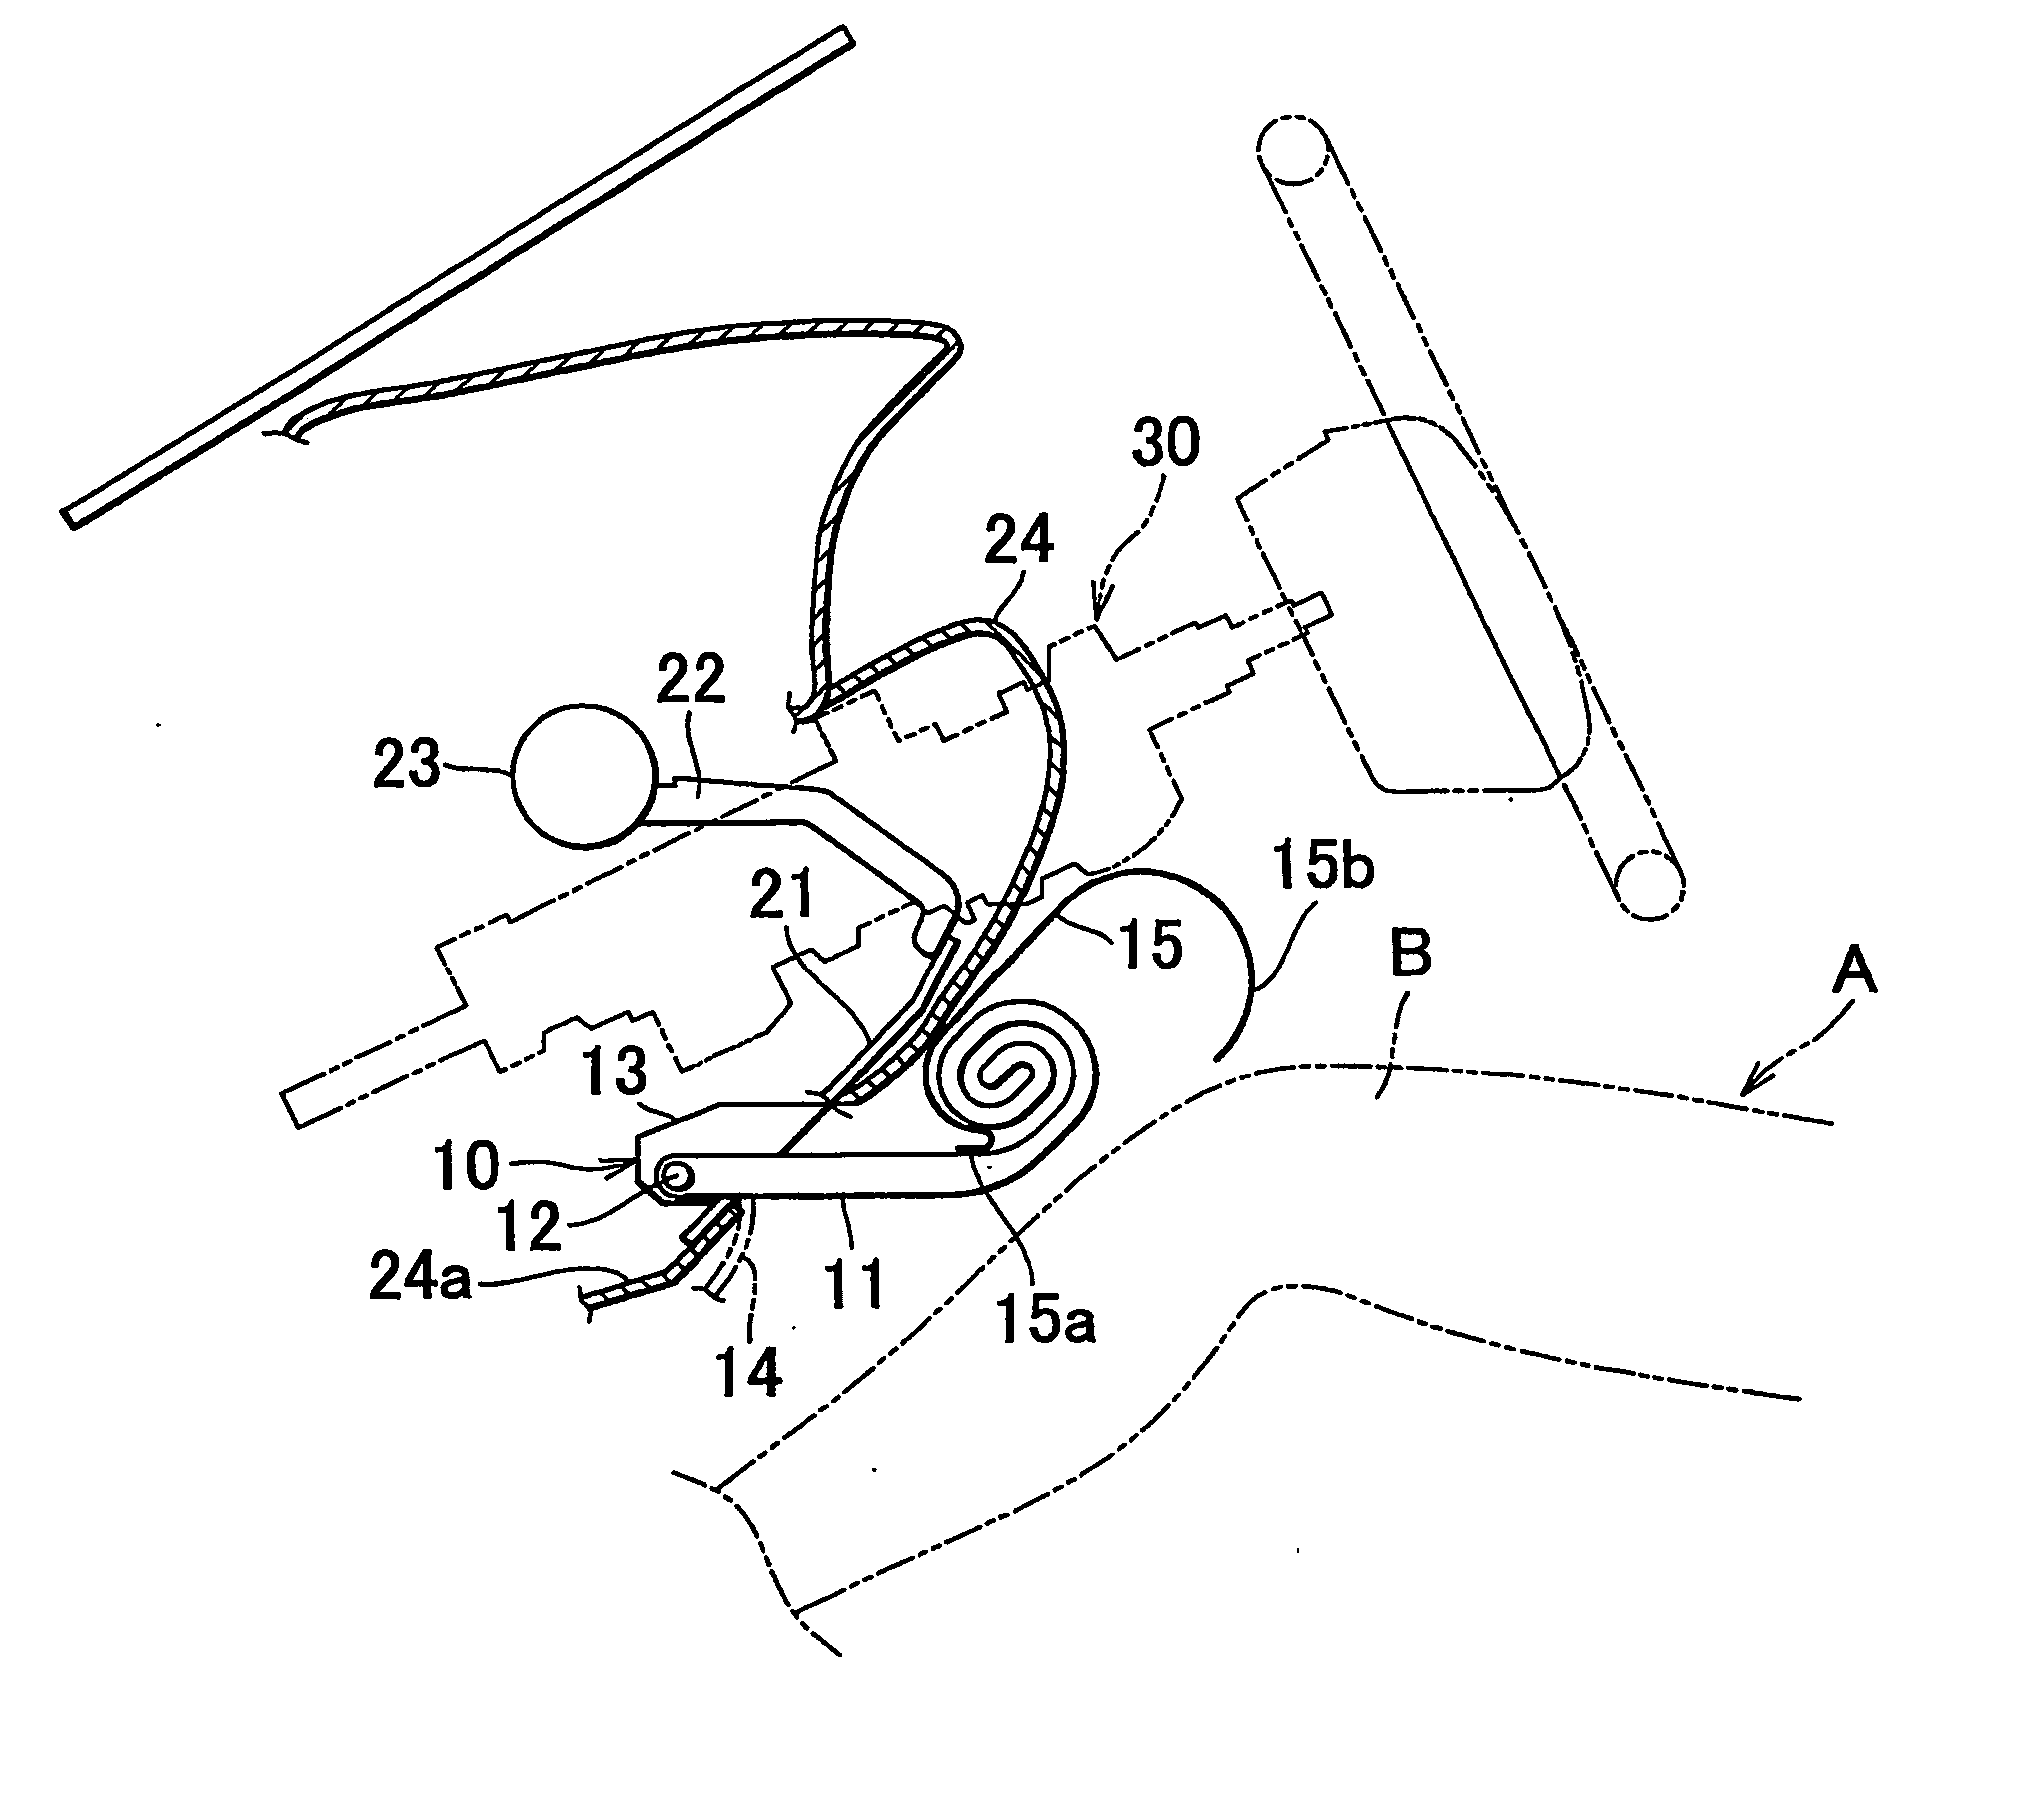 Knee protection apparatus for vehicle occupant